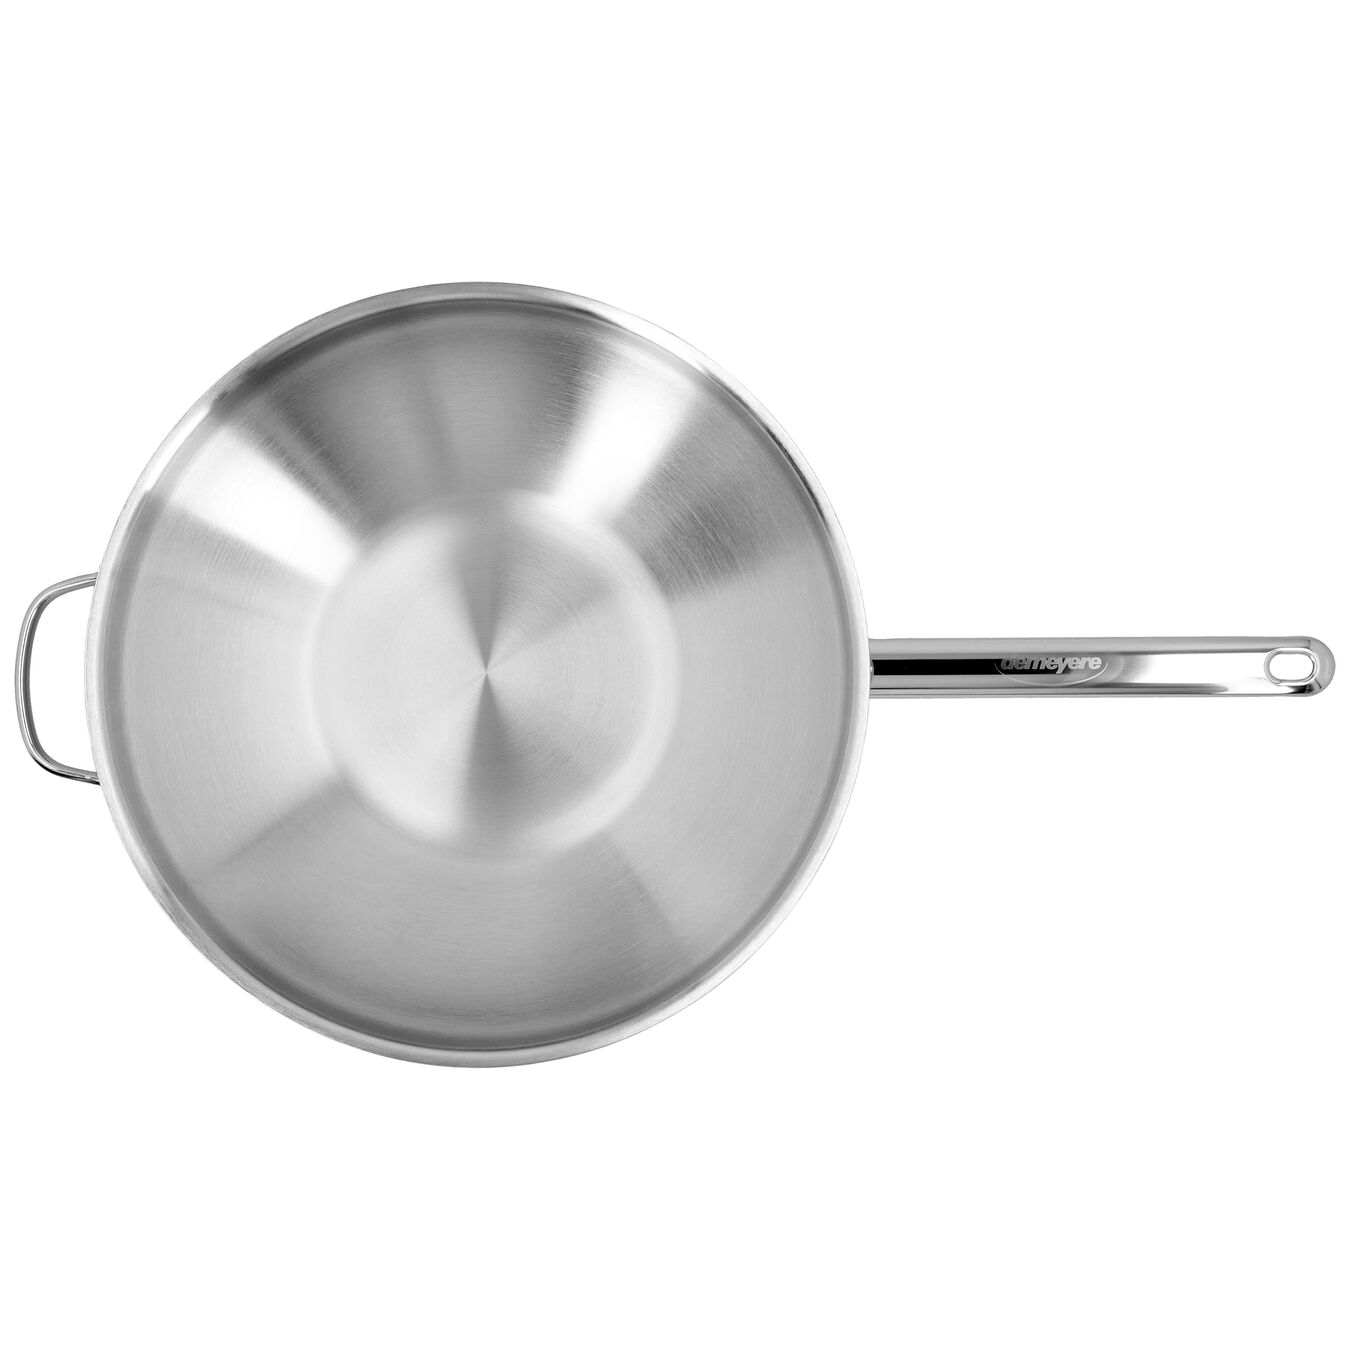 12.5-inch, 18/10 Stainless Steel, Flat Bottom Wok with Helper Handle, silver,,large 2